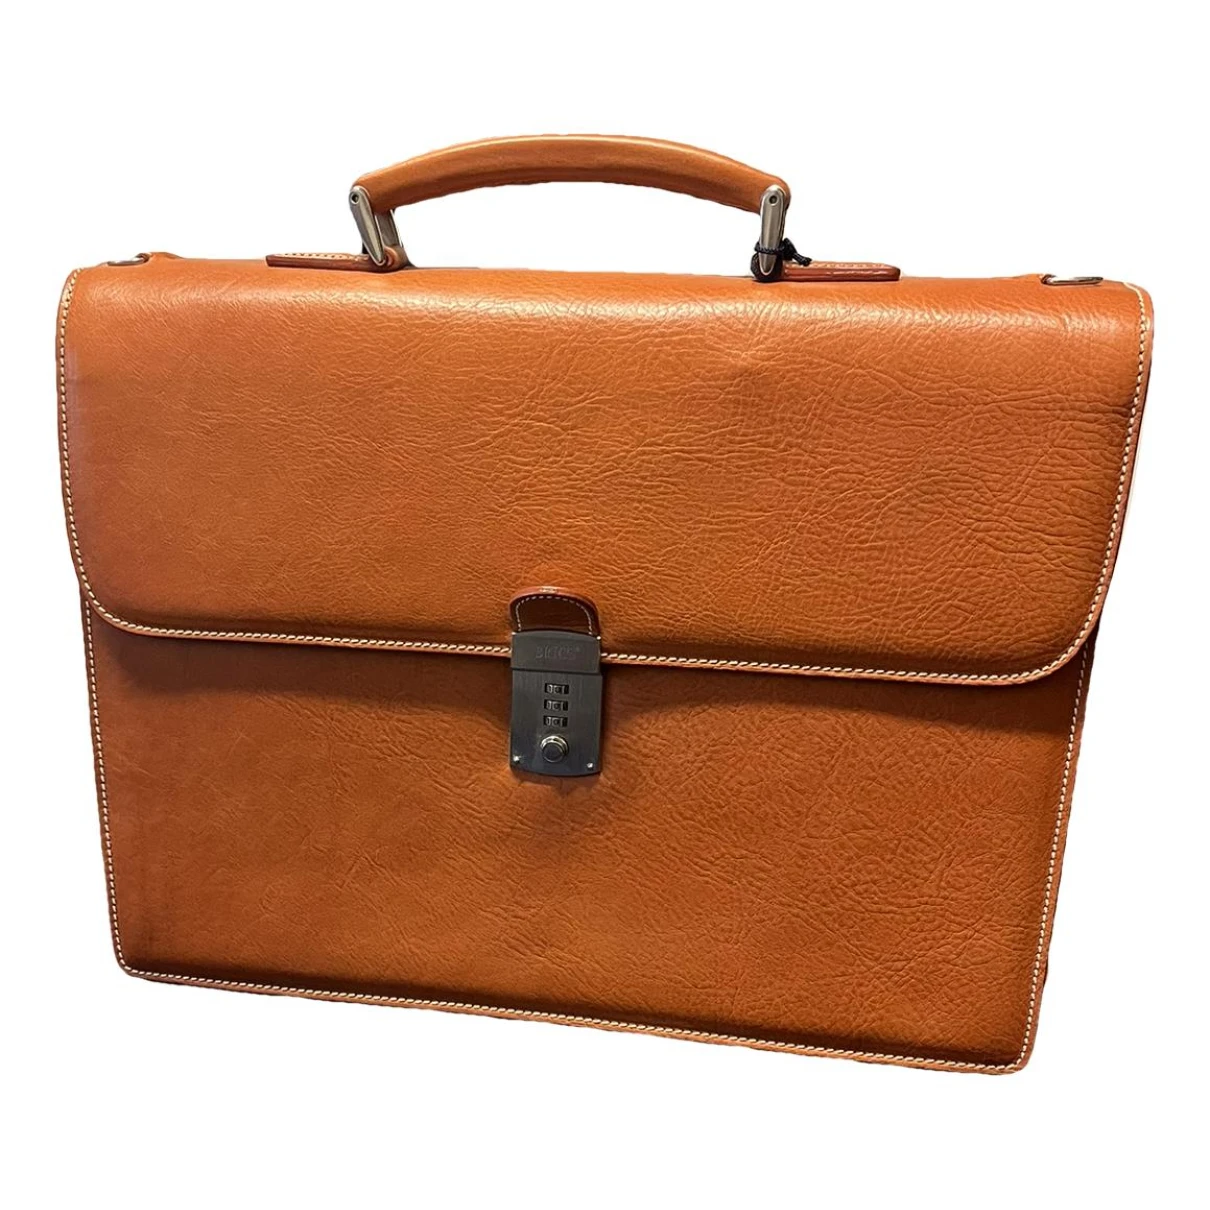 Pre-owned Bric's Leather Satchel In Camel